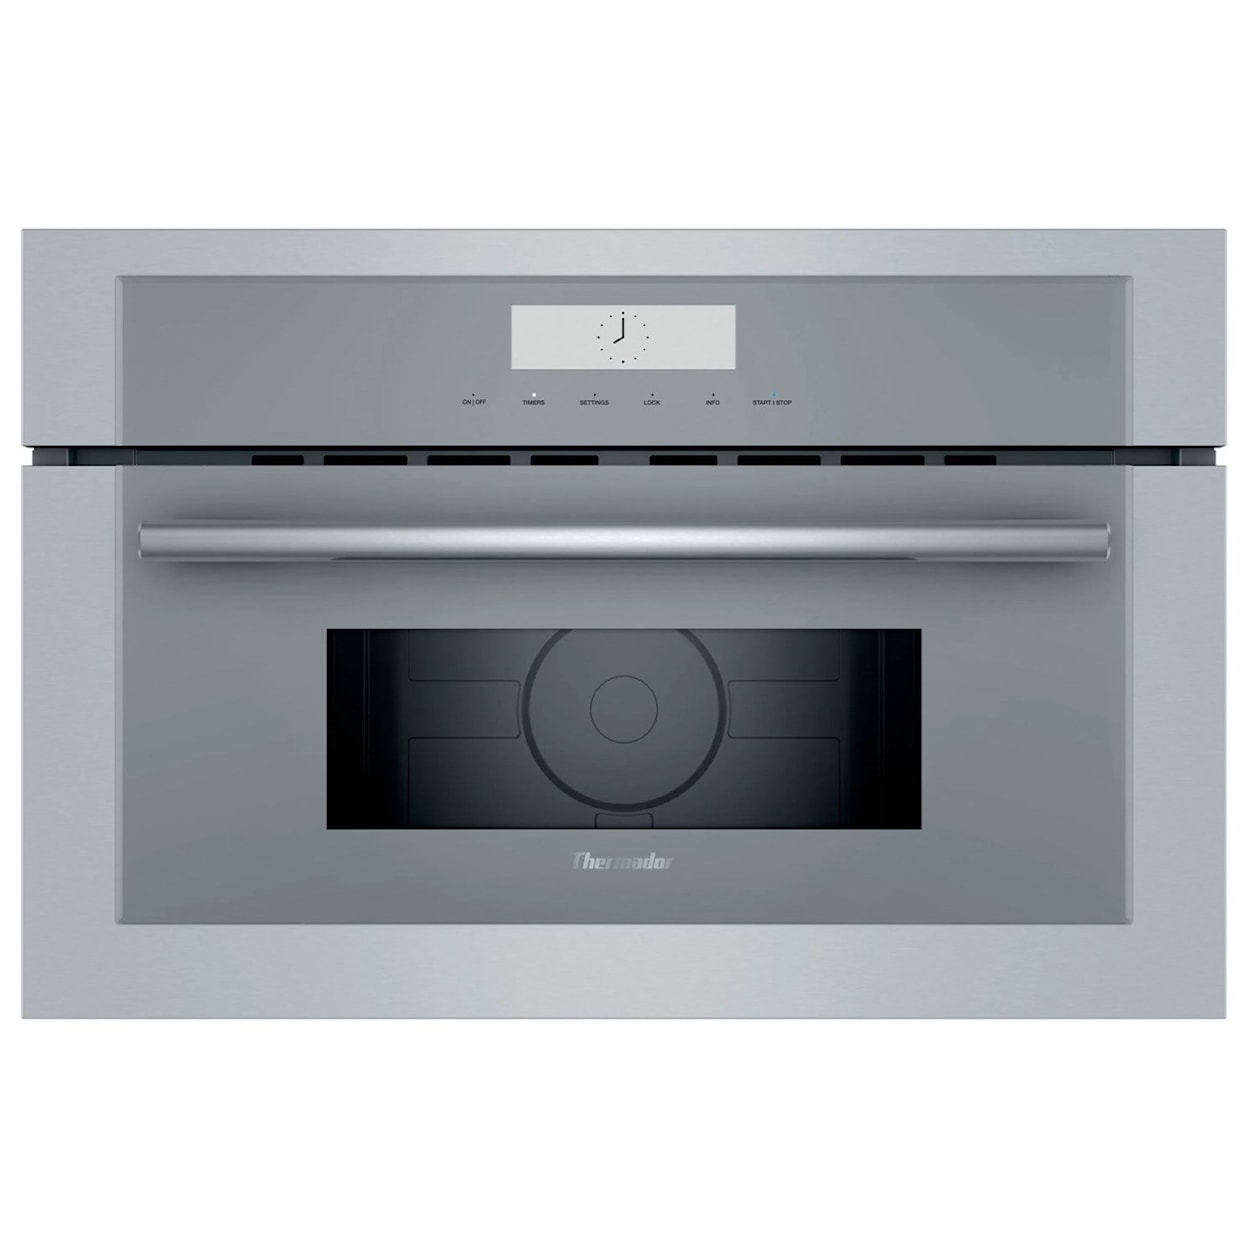 Thermador Microwaves - Thermador 30" Masterpiece® Built-In Microwave